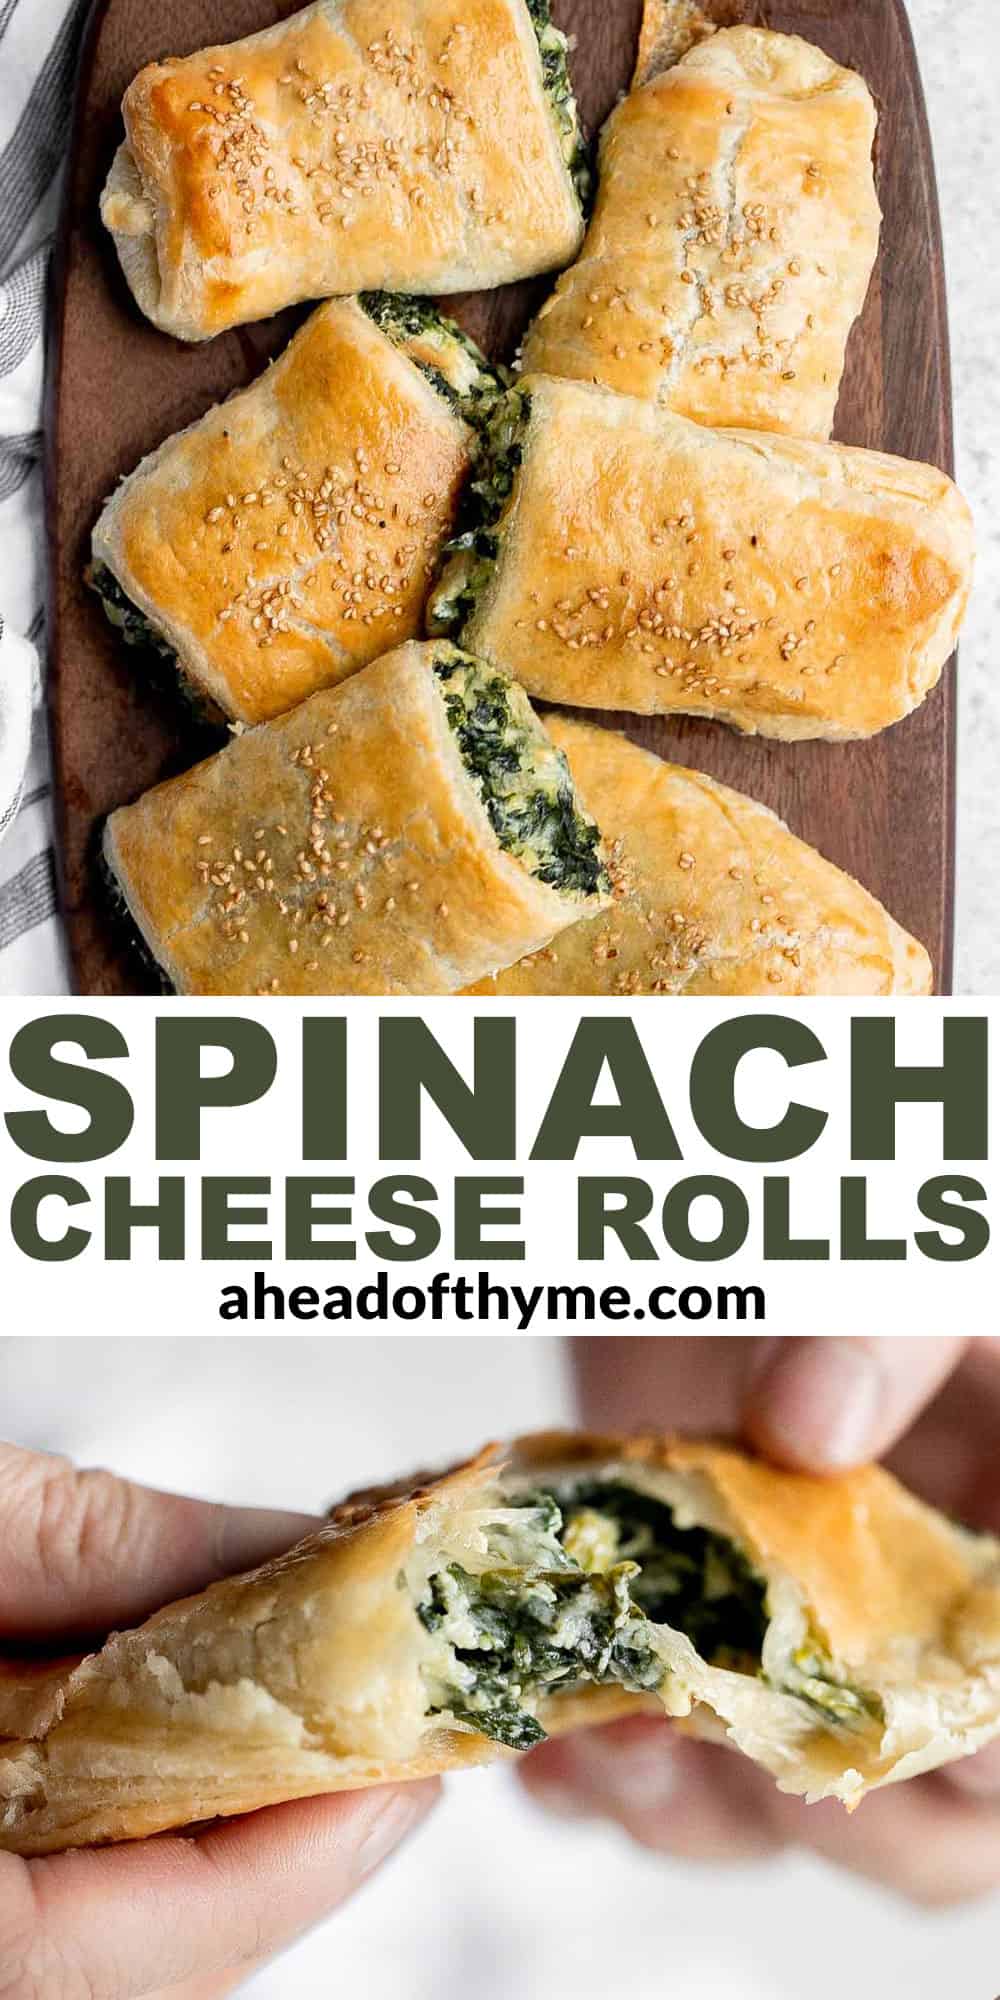 Spinach Cheese Rolls